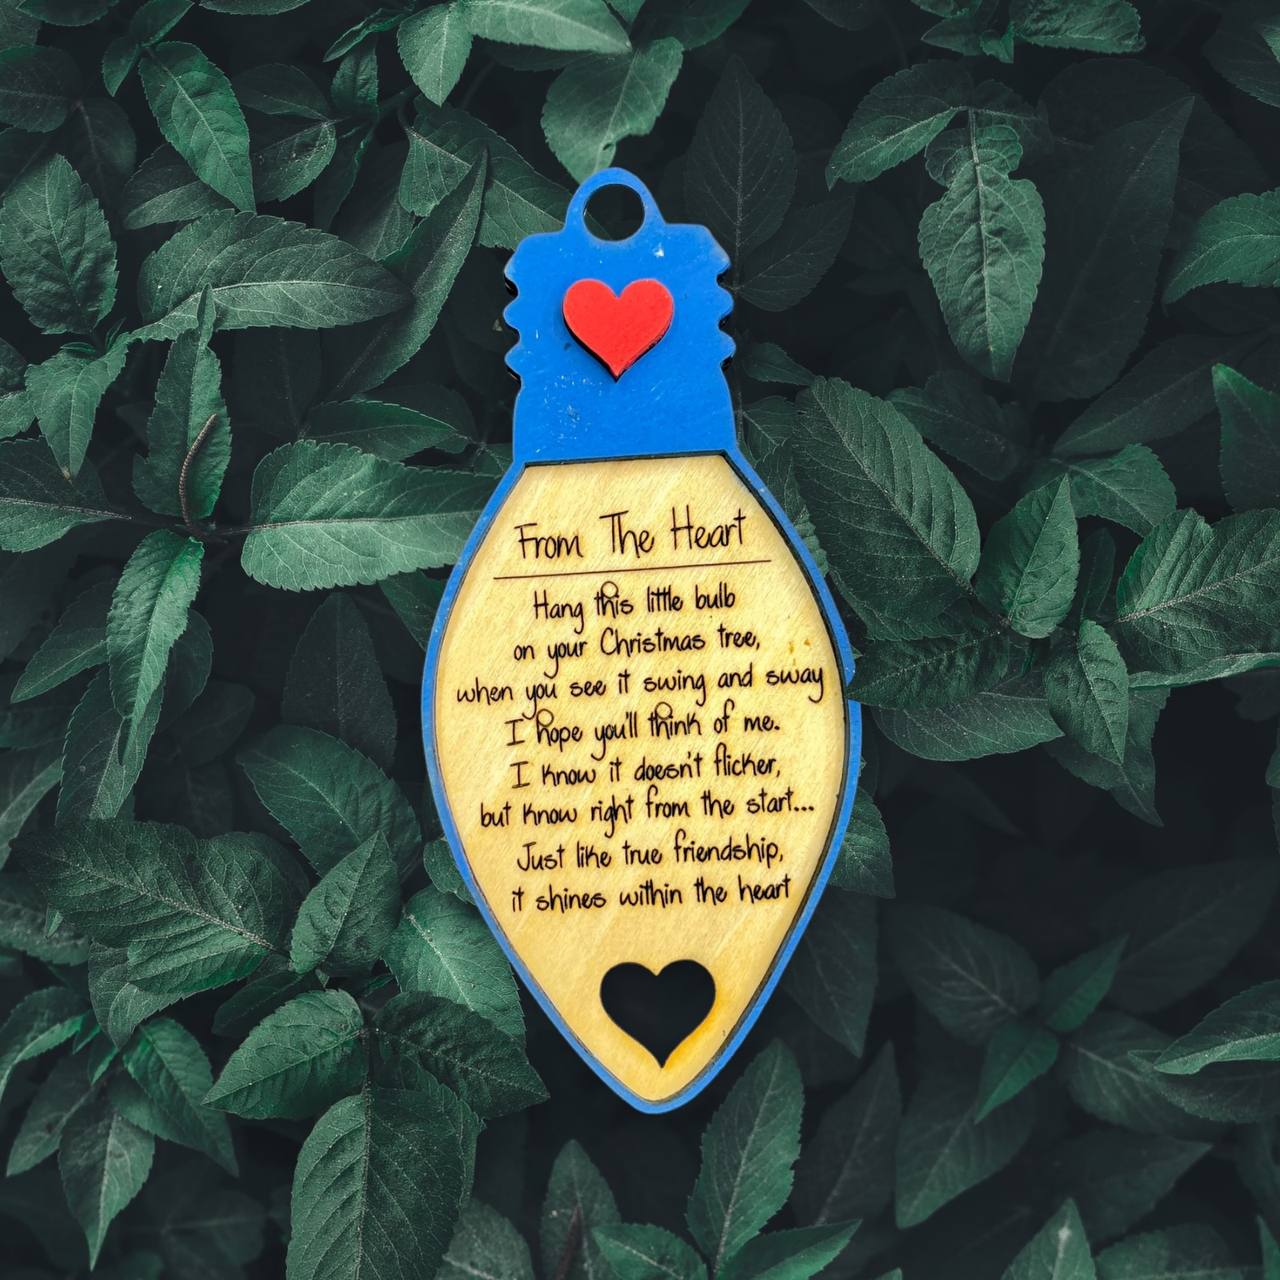 From the Heart Light Ornament